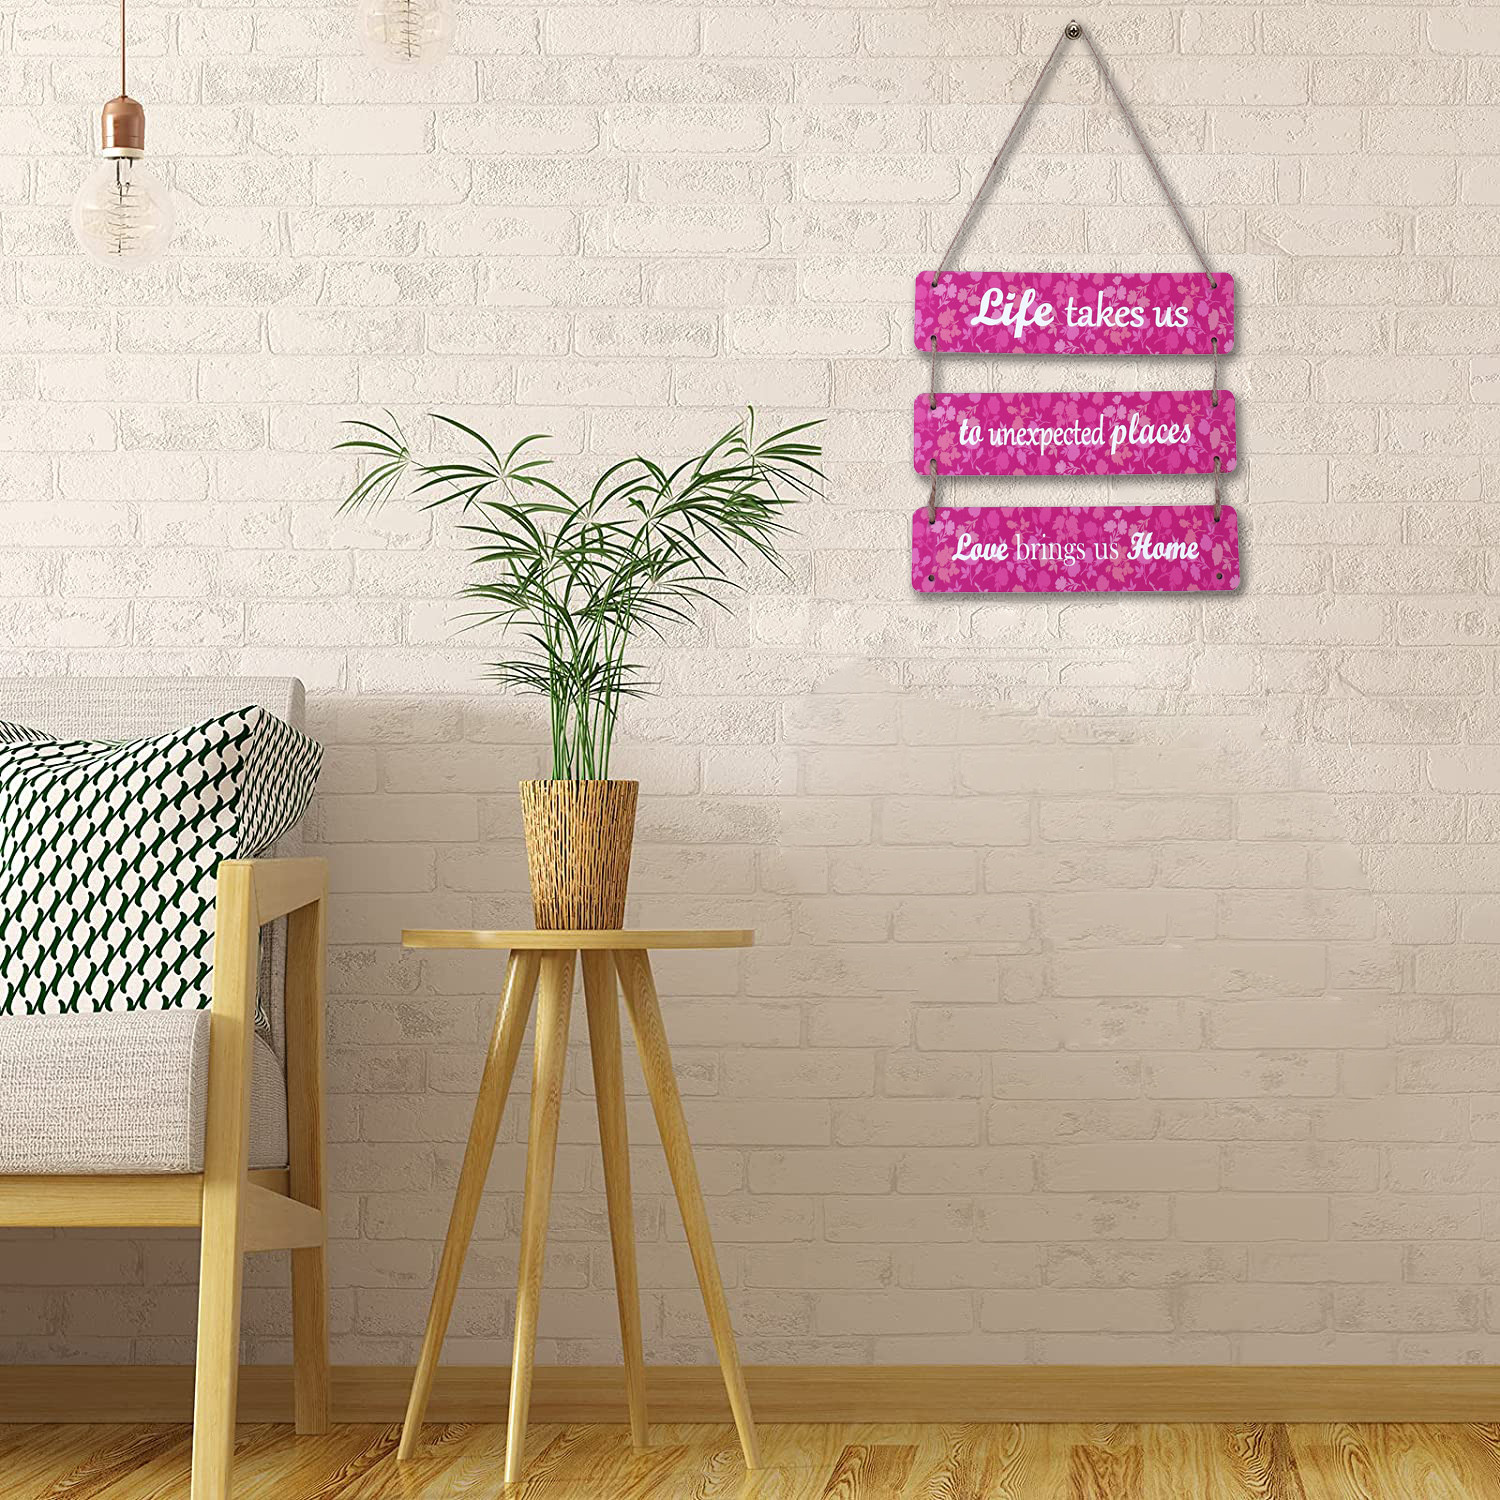 Kuber Industries Wooden 3 Layered Motivational & Meaningfull Wall Hanging Quotes For Home,Office Decoration (Pink)